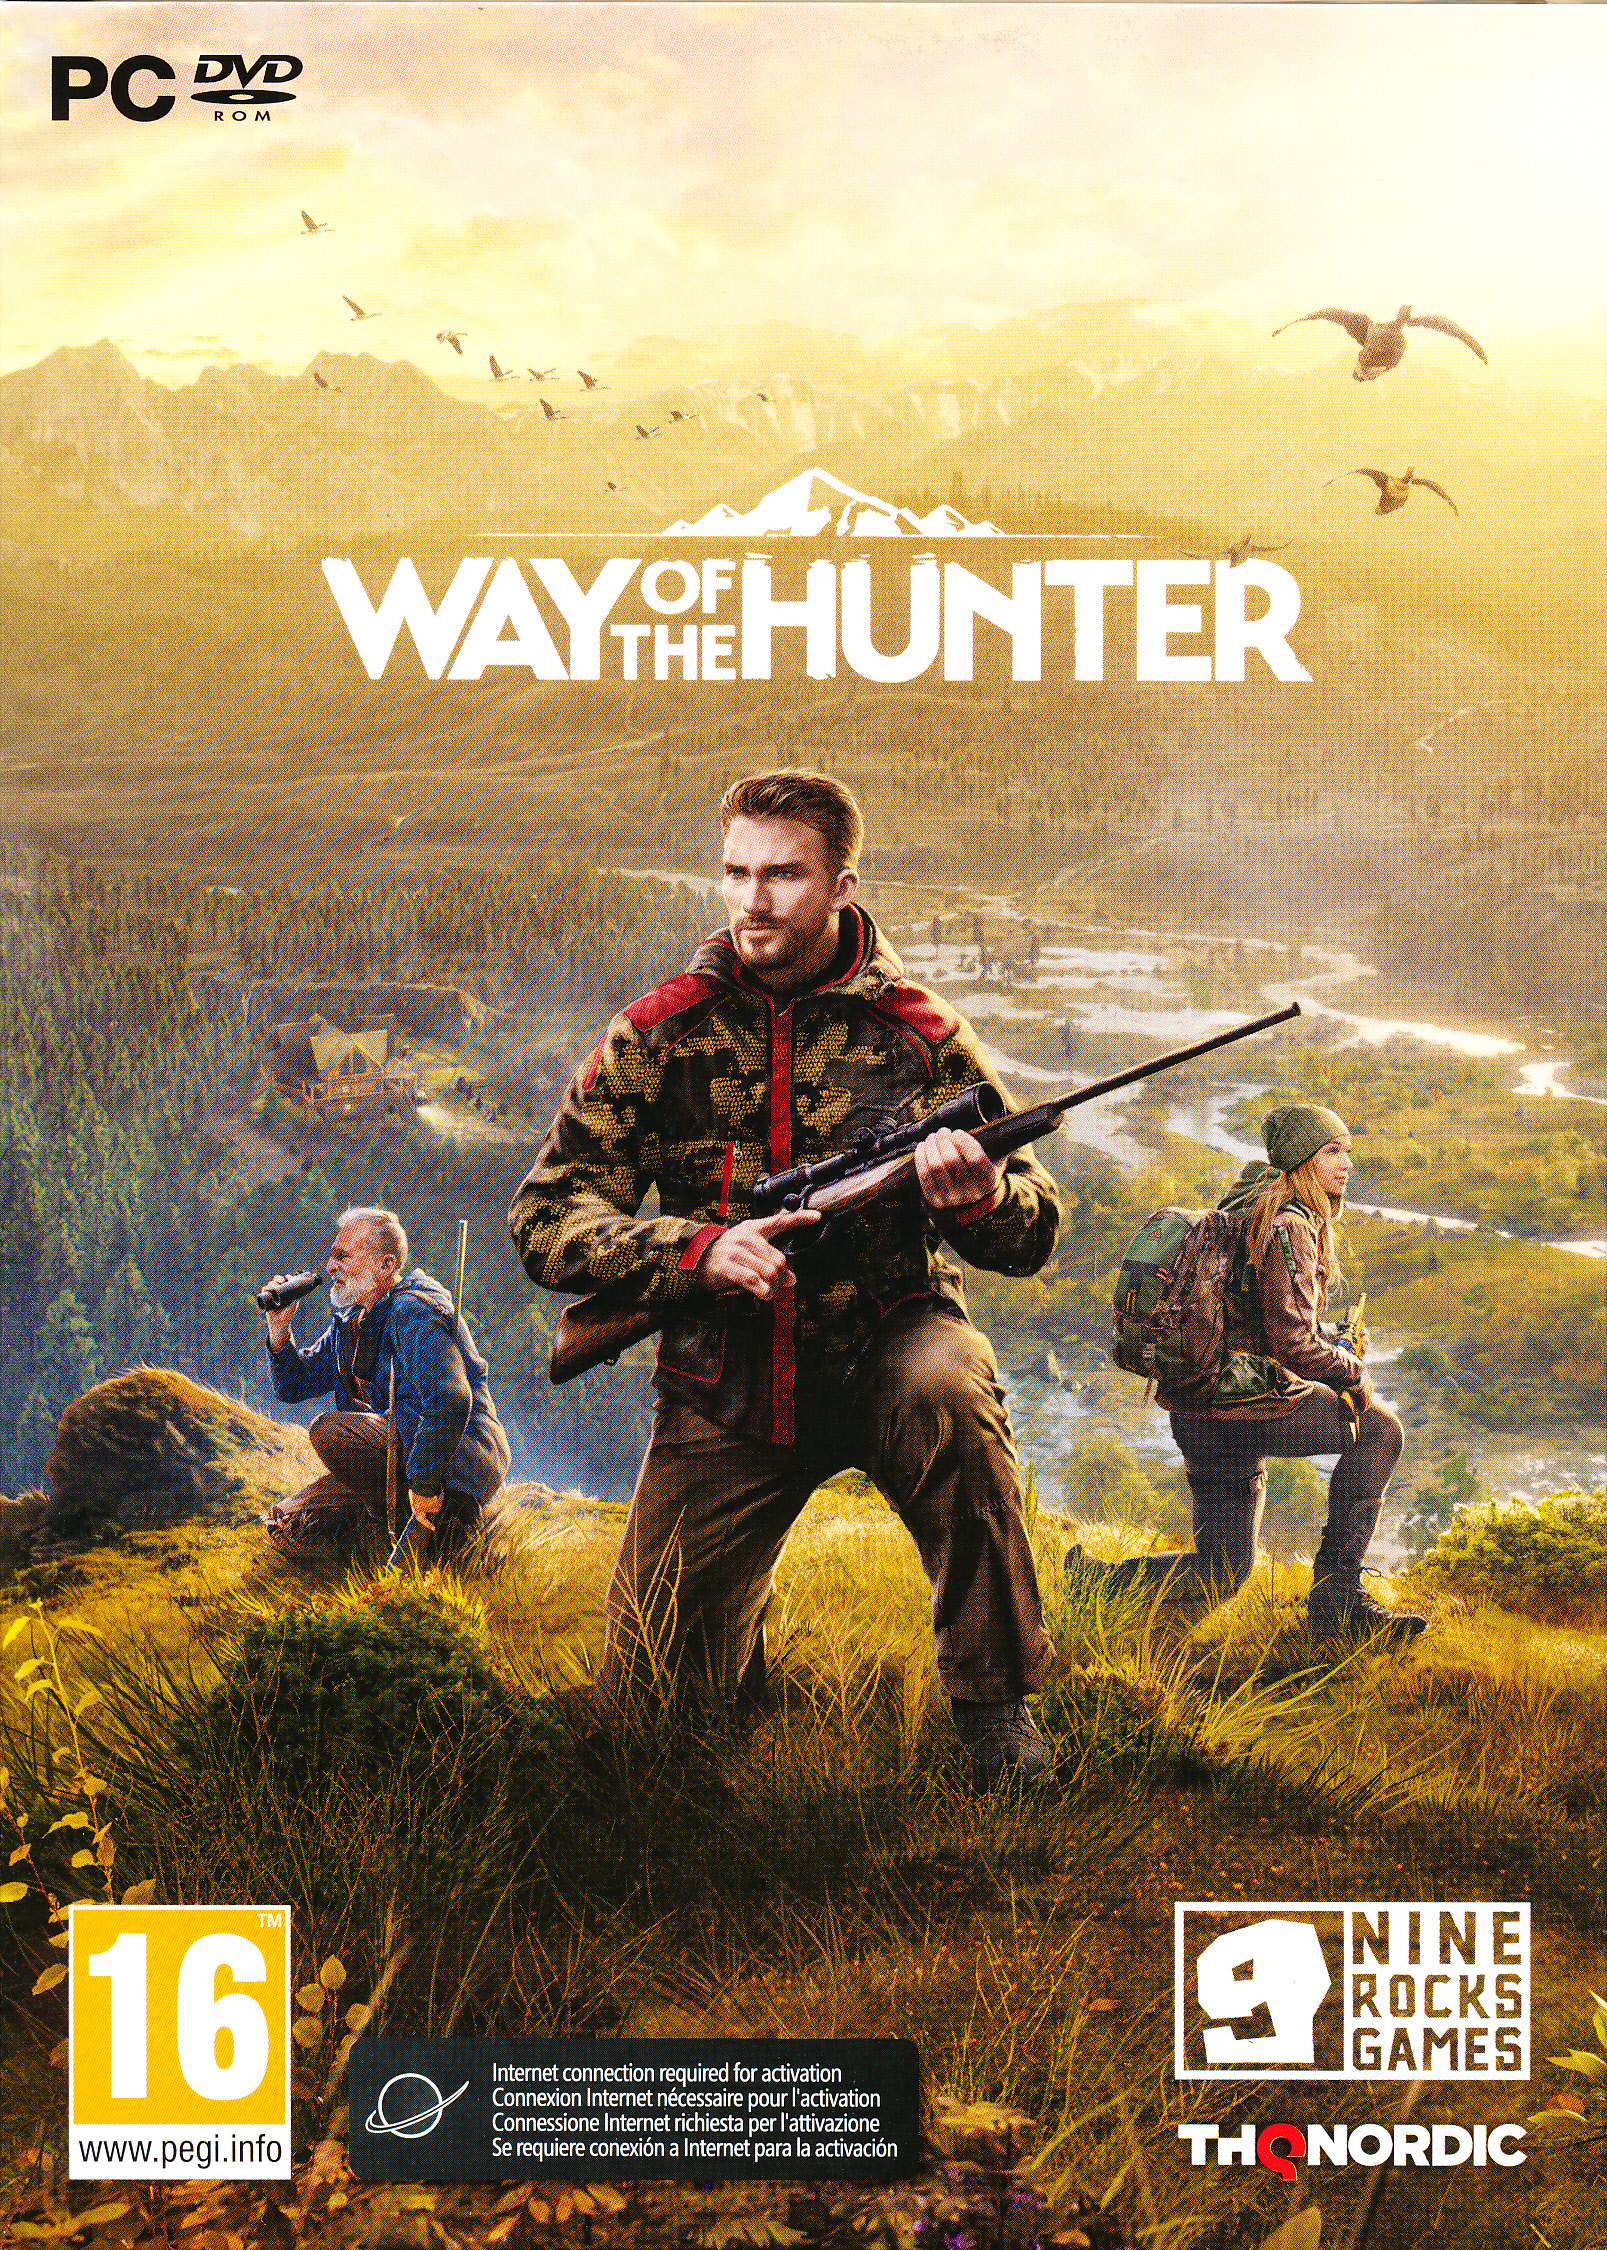 Way of the Hunter PC